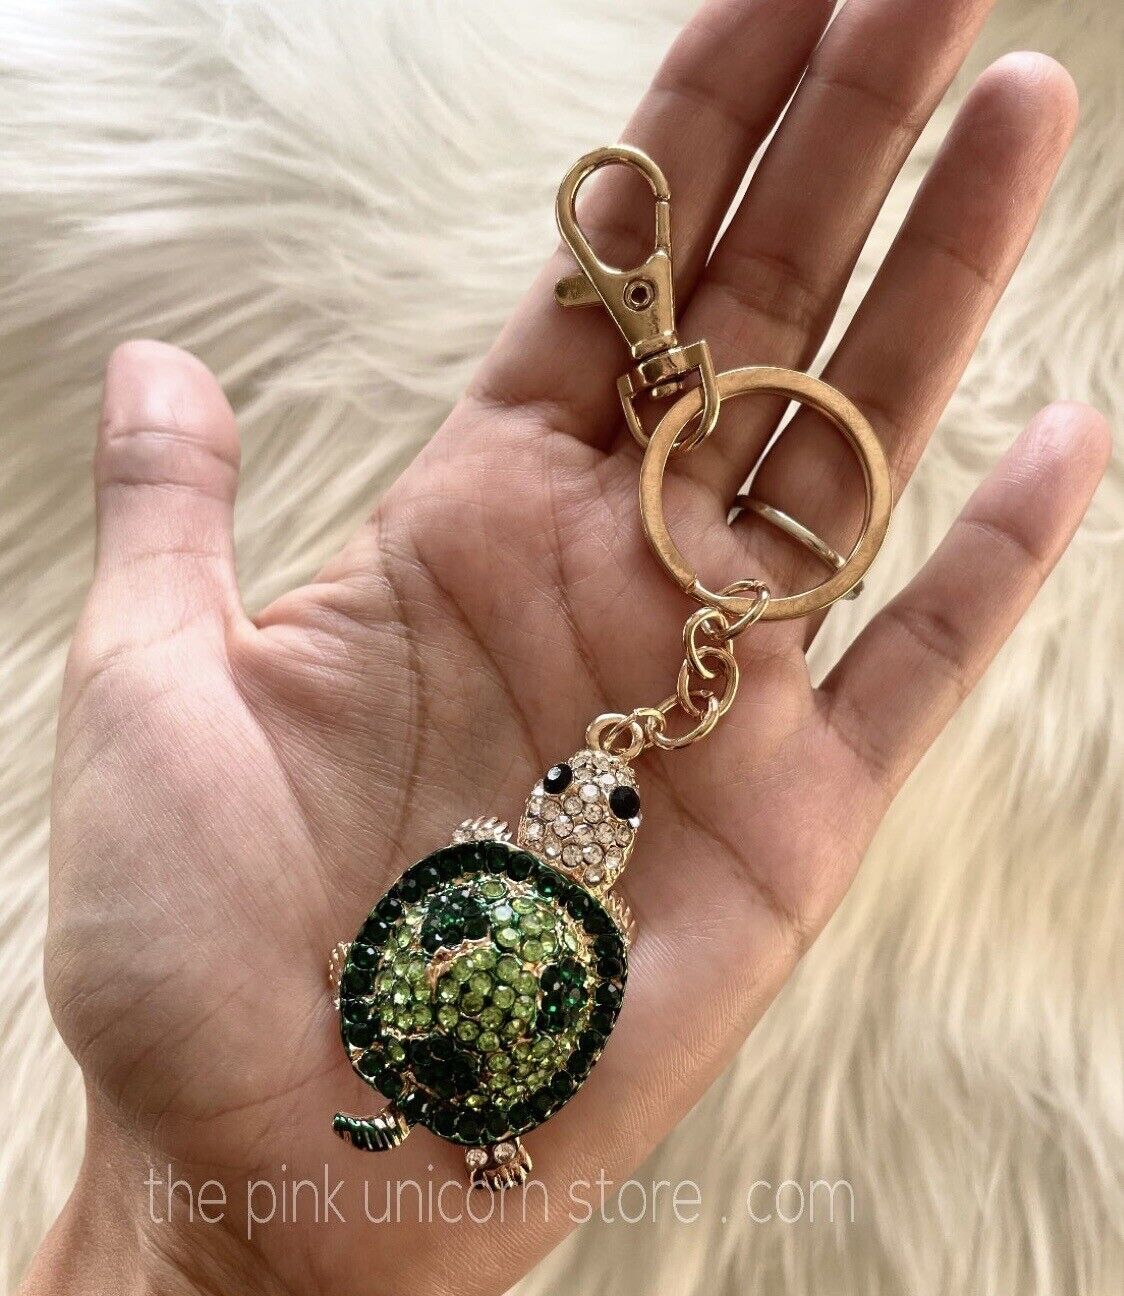 Brand New Cute Sparkly Green Turtle Keychain Key Ring Gold Gift